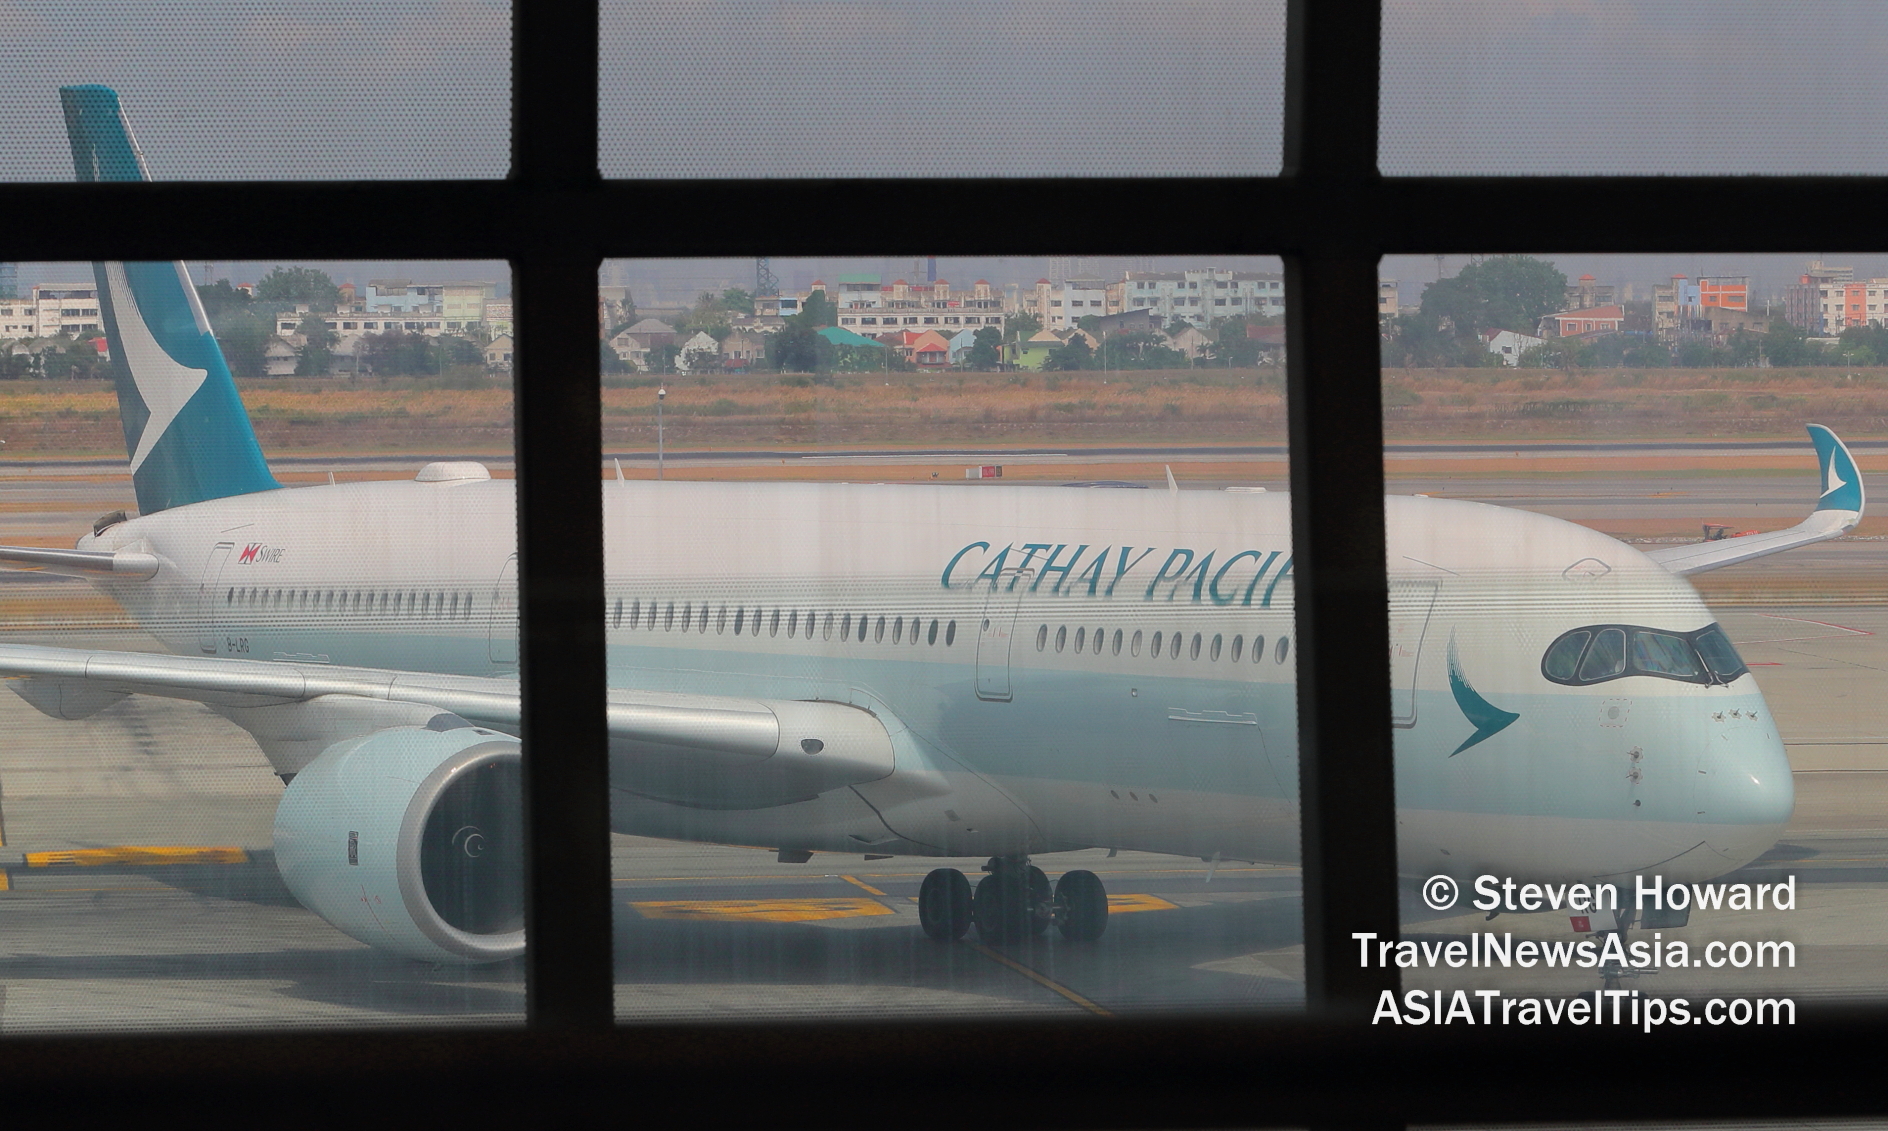 Cathay Pacific Airbus A350 at BKK. Picture by Steven Howard of TravelNewsAsia.com Click to enlarge.